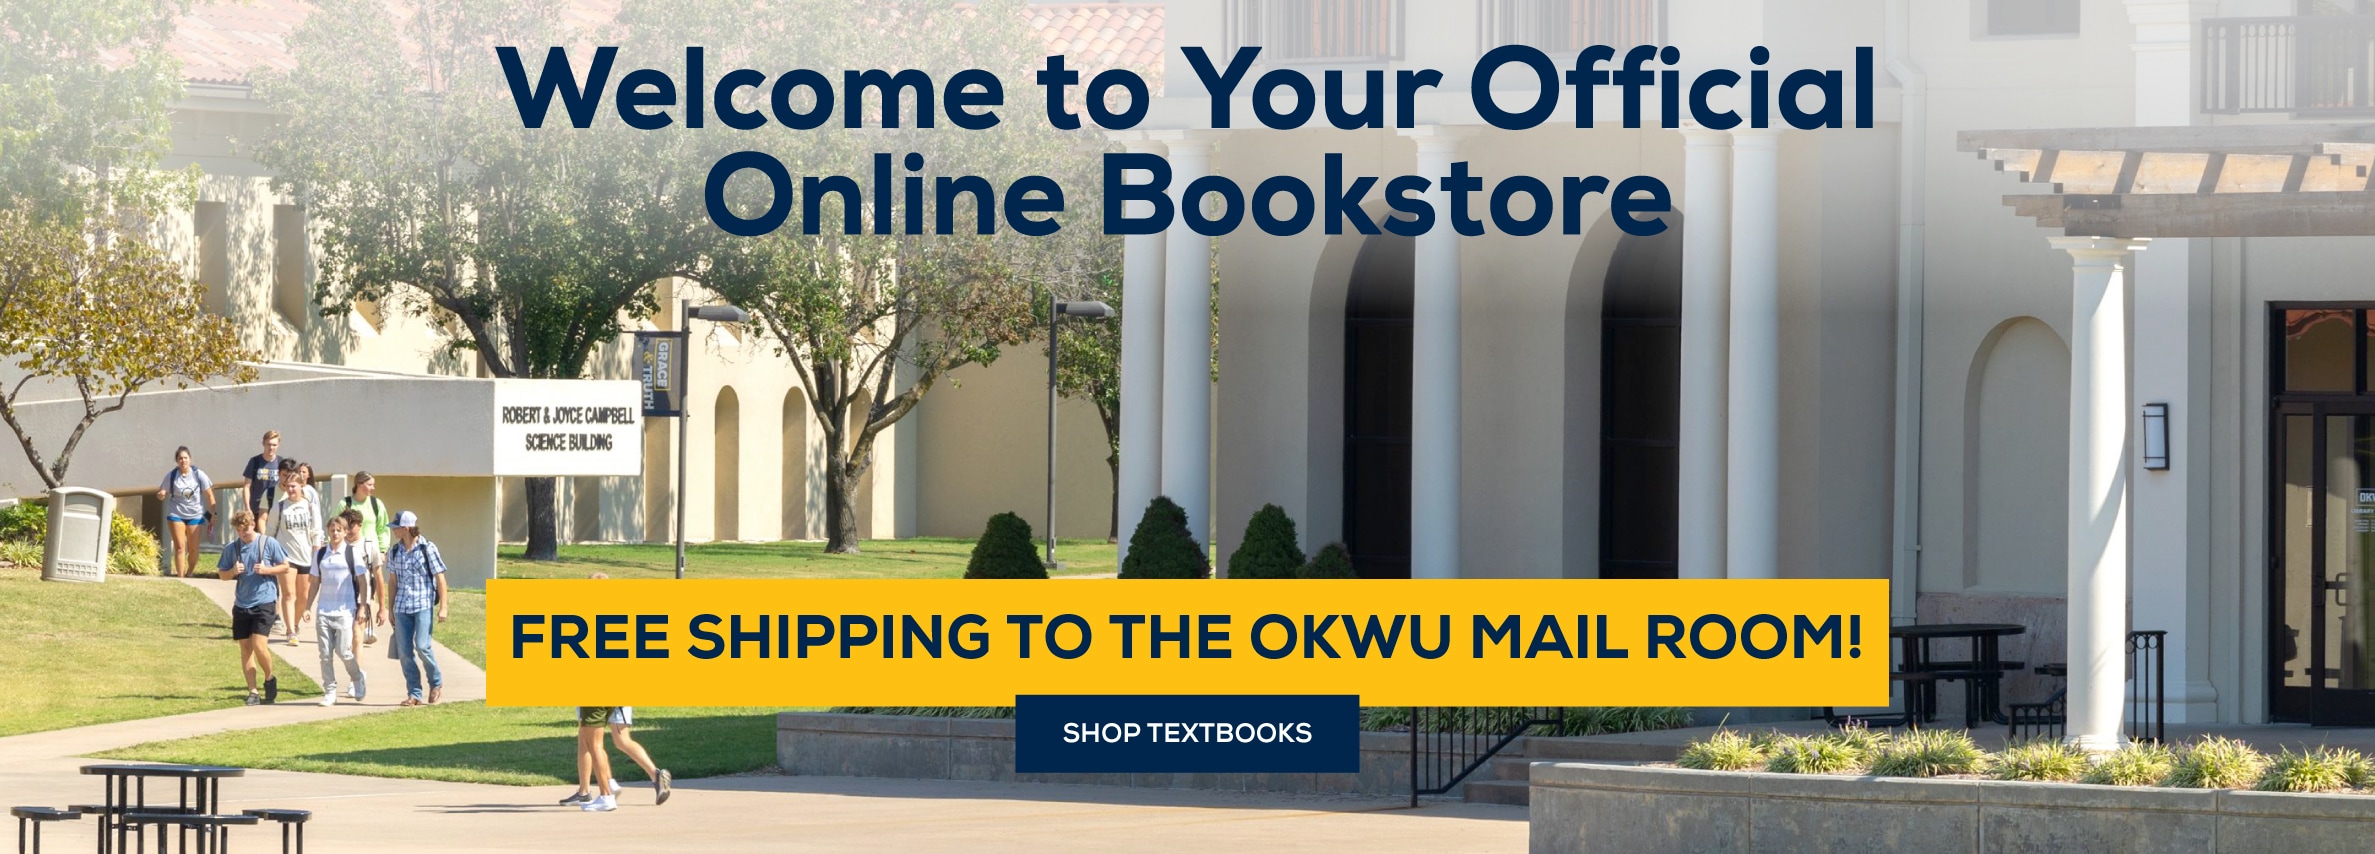 Welcome to Your Official Online Bookstore. Free Shipping to the OKWU Mail Room* Excludes Marketplace Purchases. Shop Textbooks.